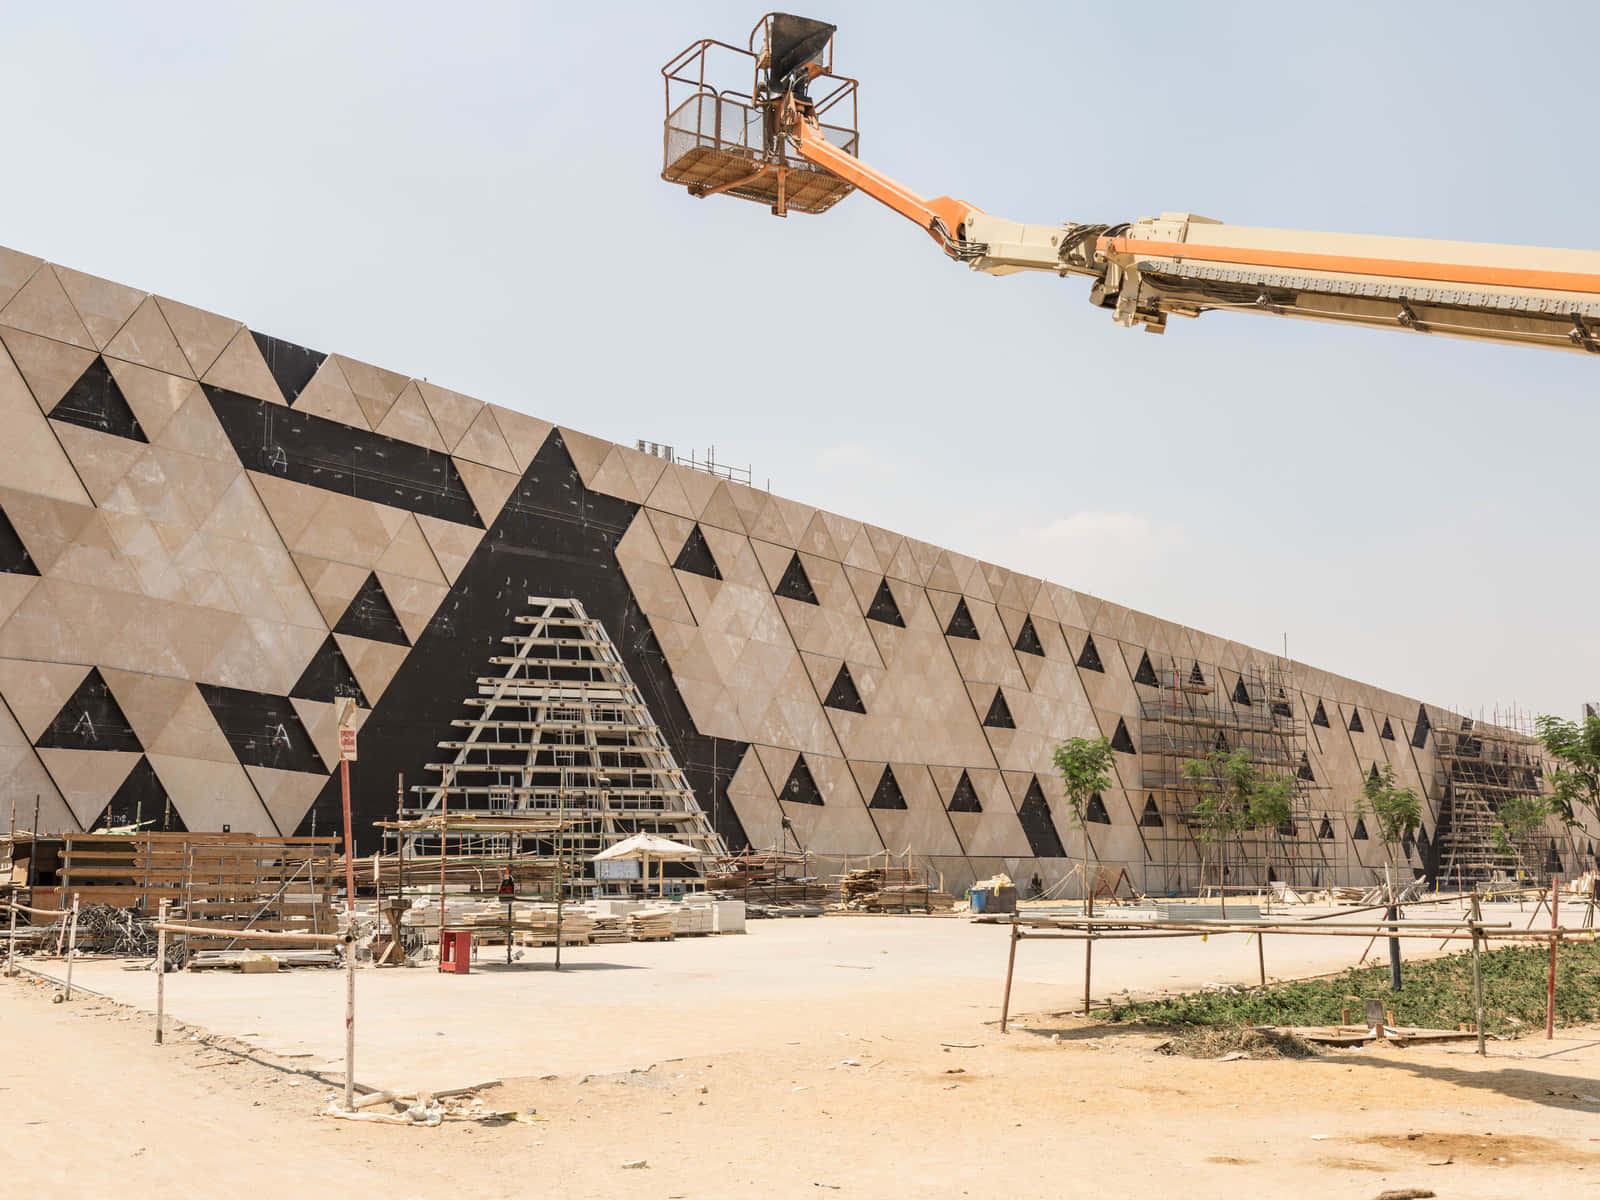 Architectural Design Of Grand Egyptian Museum Wallpaper